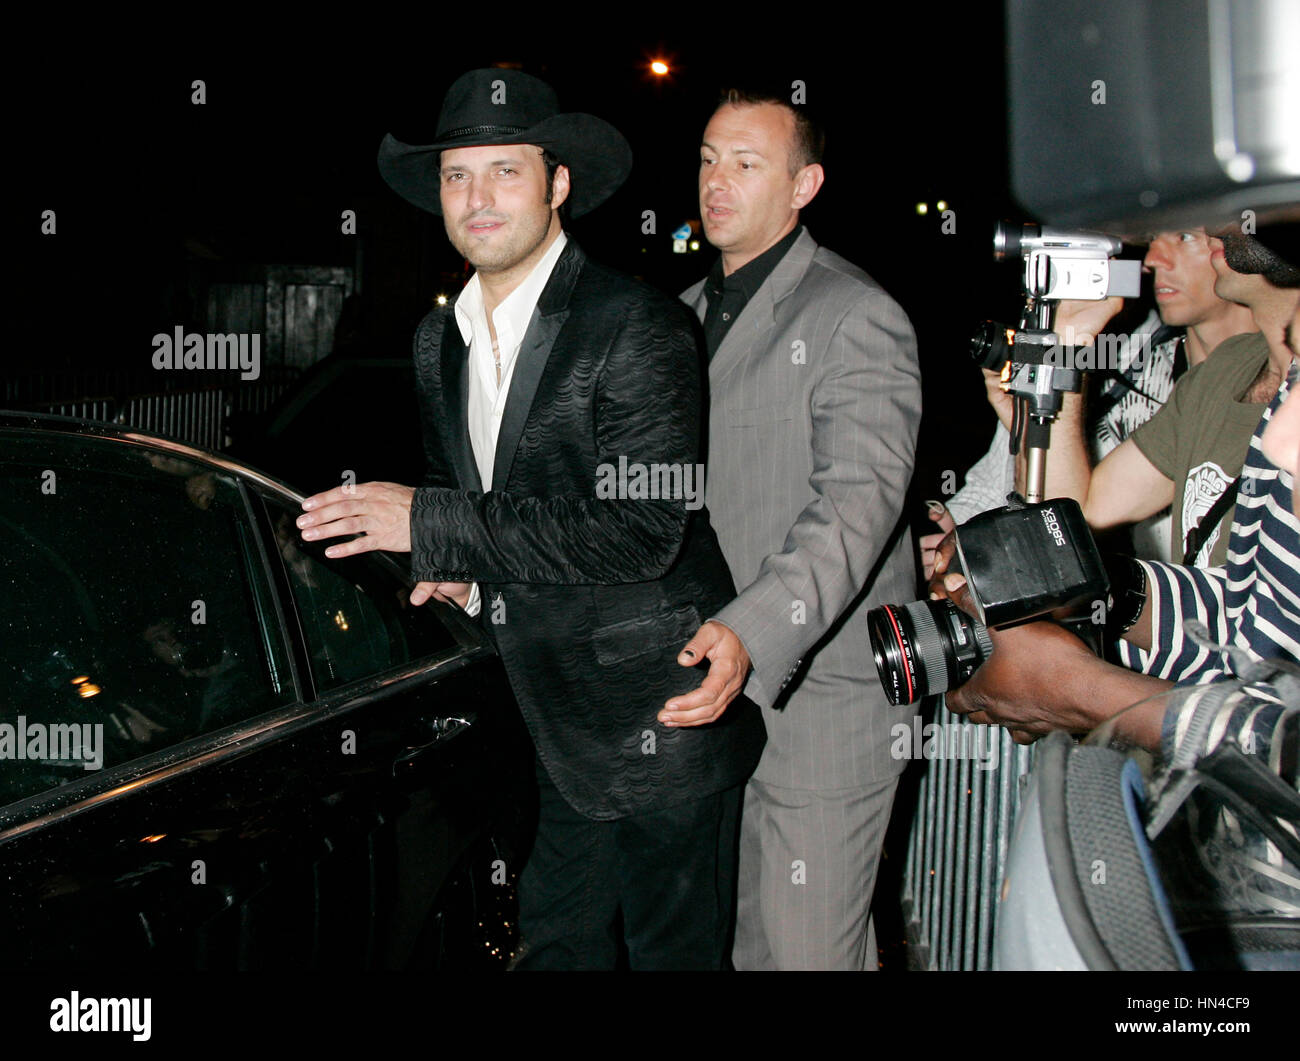 Robert Rodriquez leaves the Dolce & Gabbana party in Cannes, France, on May 25, 2007. Photo credit: Francis Specker Stock Photo